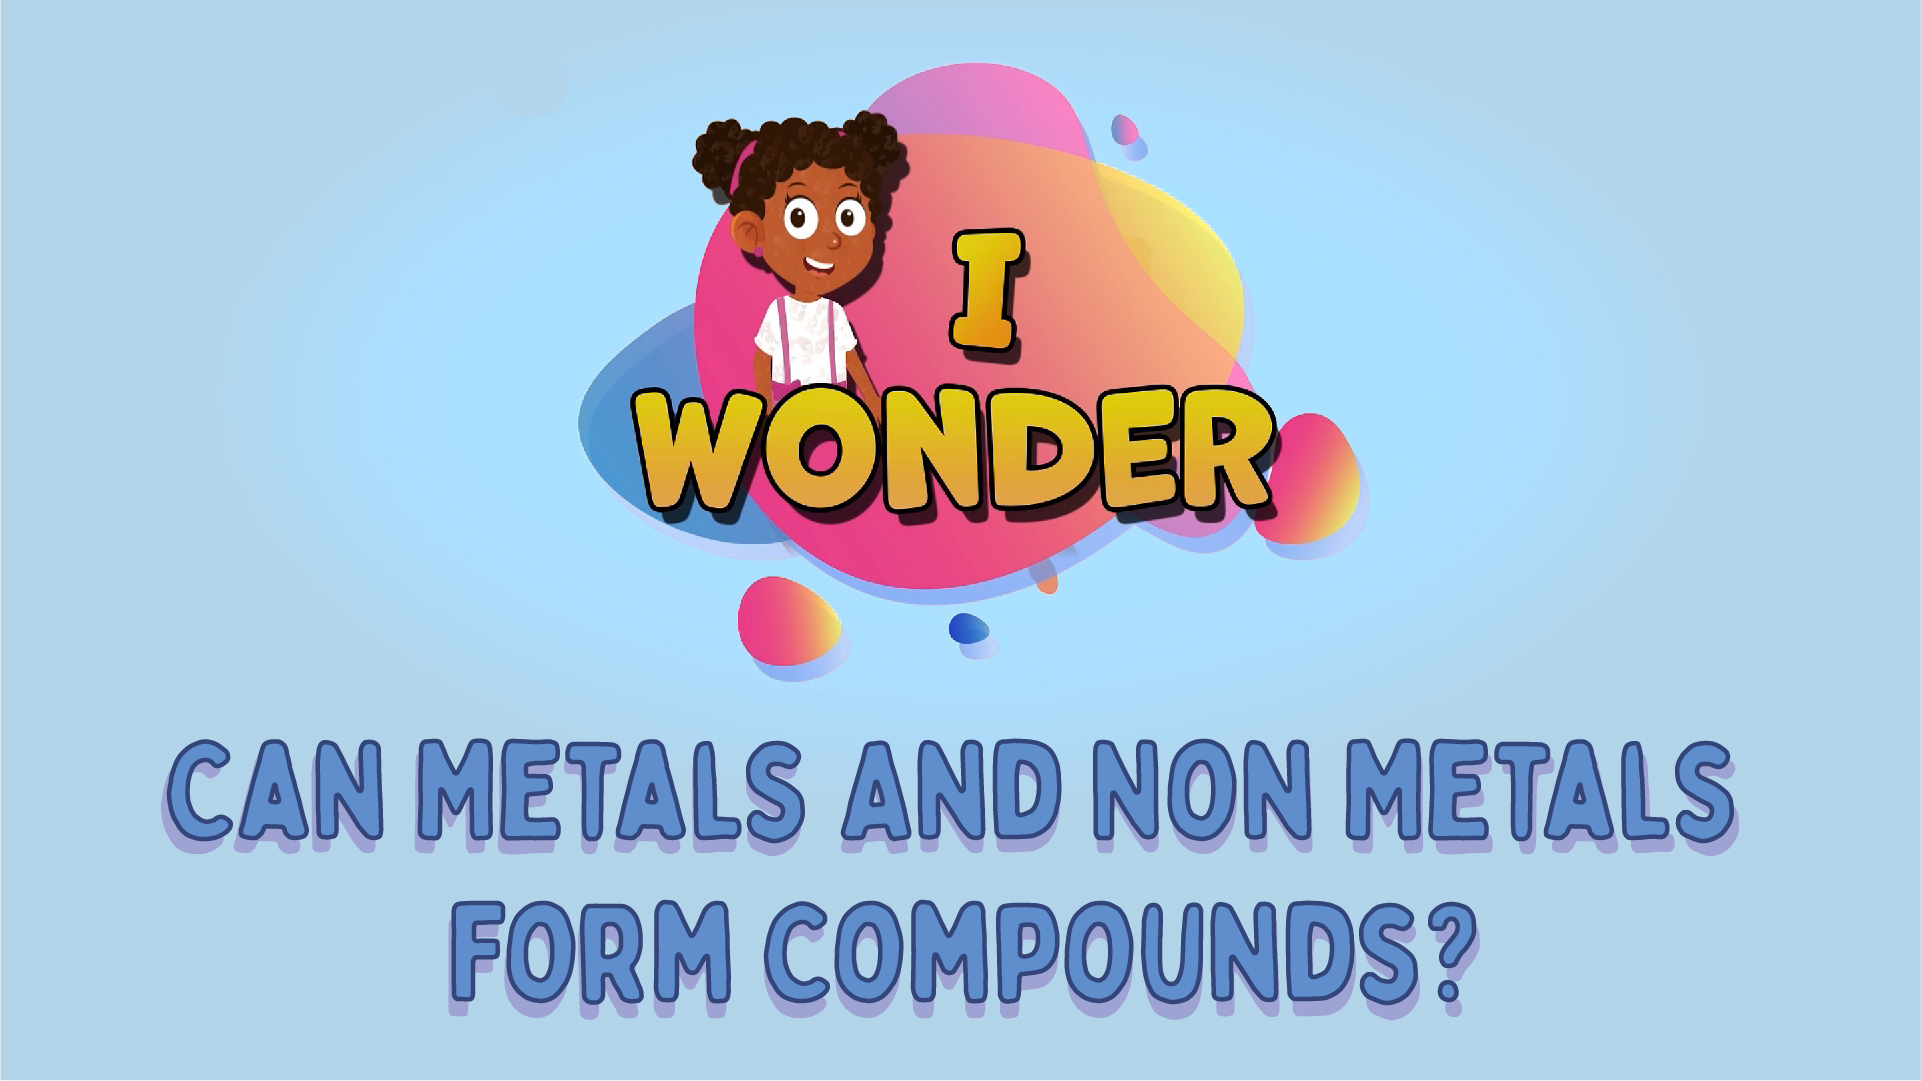 Can Metals And Non Metals Form Compounds?